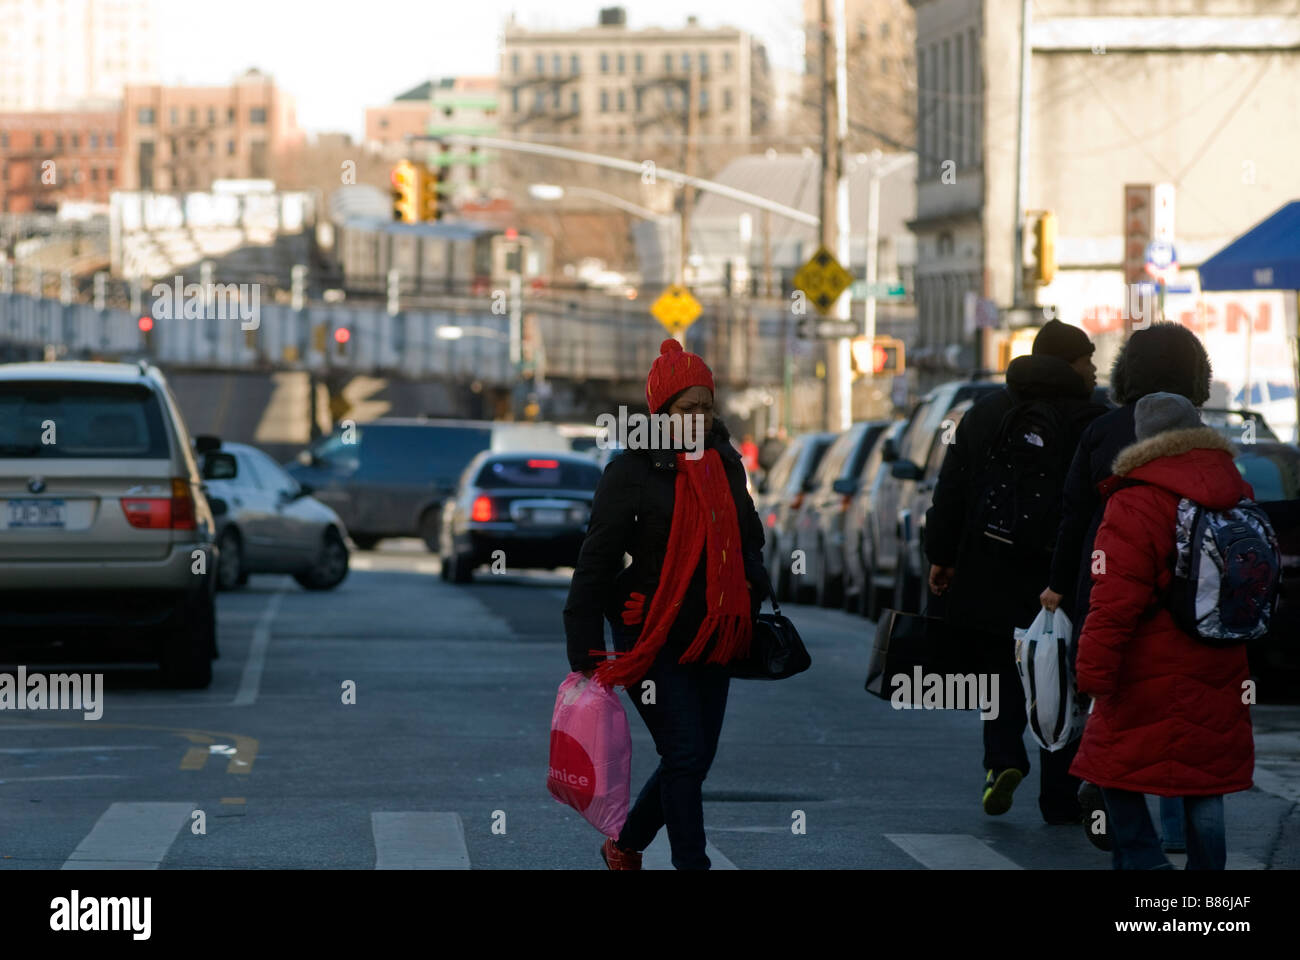 Shoppers in the the Hub in the Melrose section of the New York borough of the Bronx Stock Photo